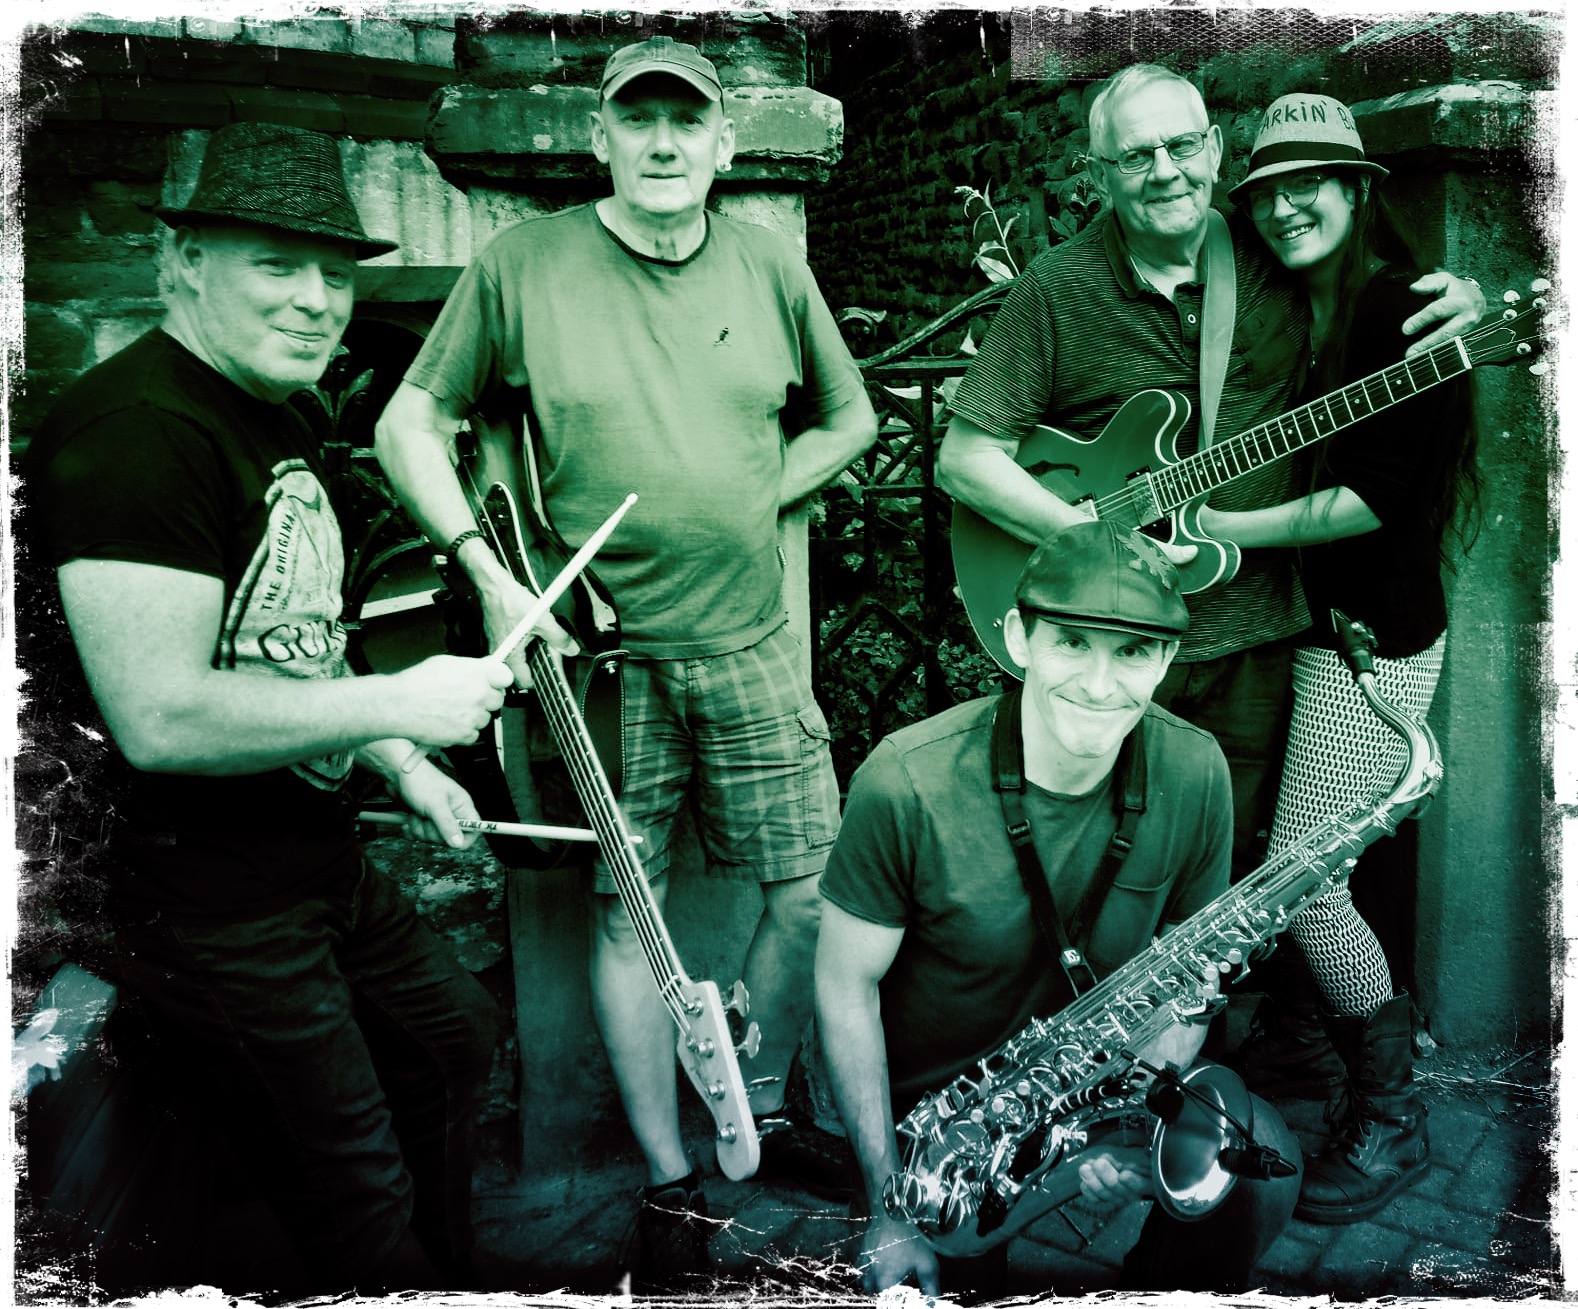 Live music blues band playing blues music for pubs music for wedding receptions and music for festivals. Specialising in Chicago Blues, Delta Blues, Texas Blues and Blues Rock